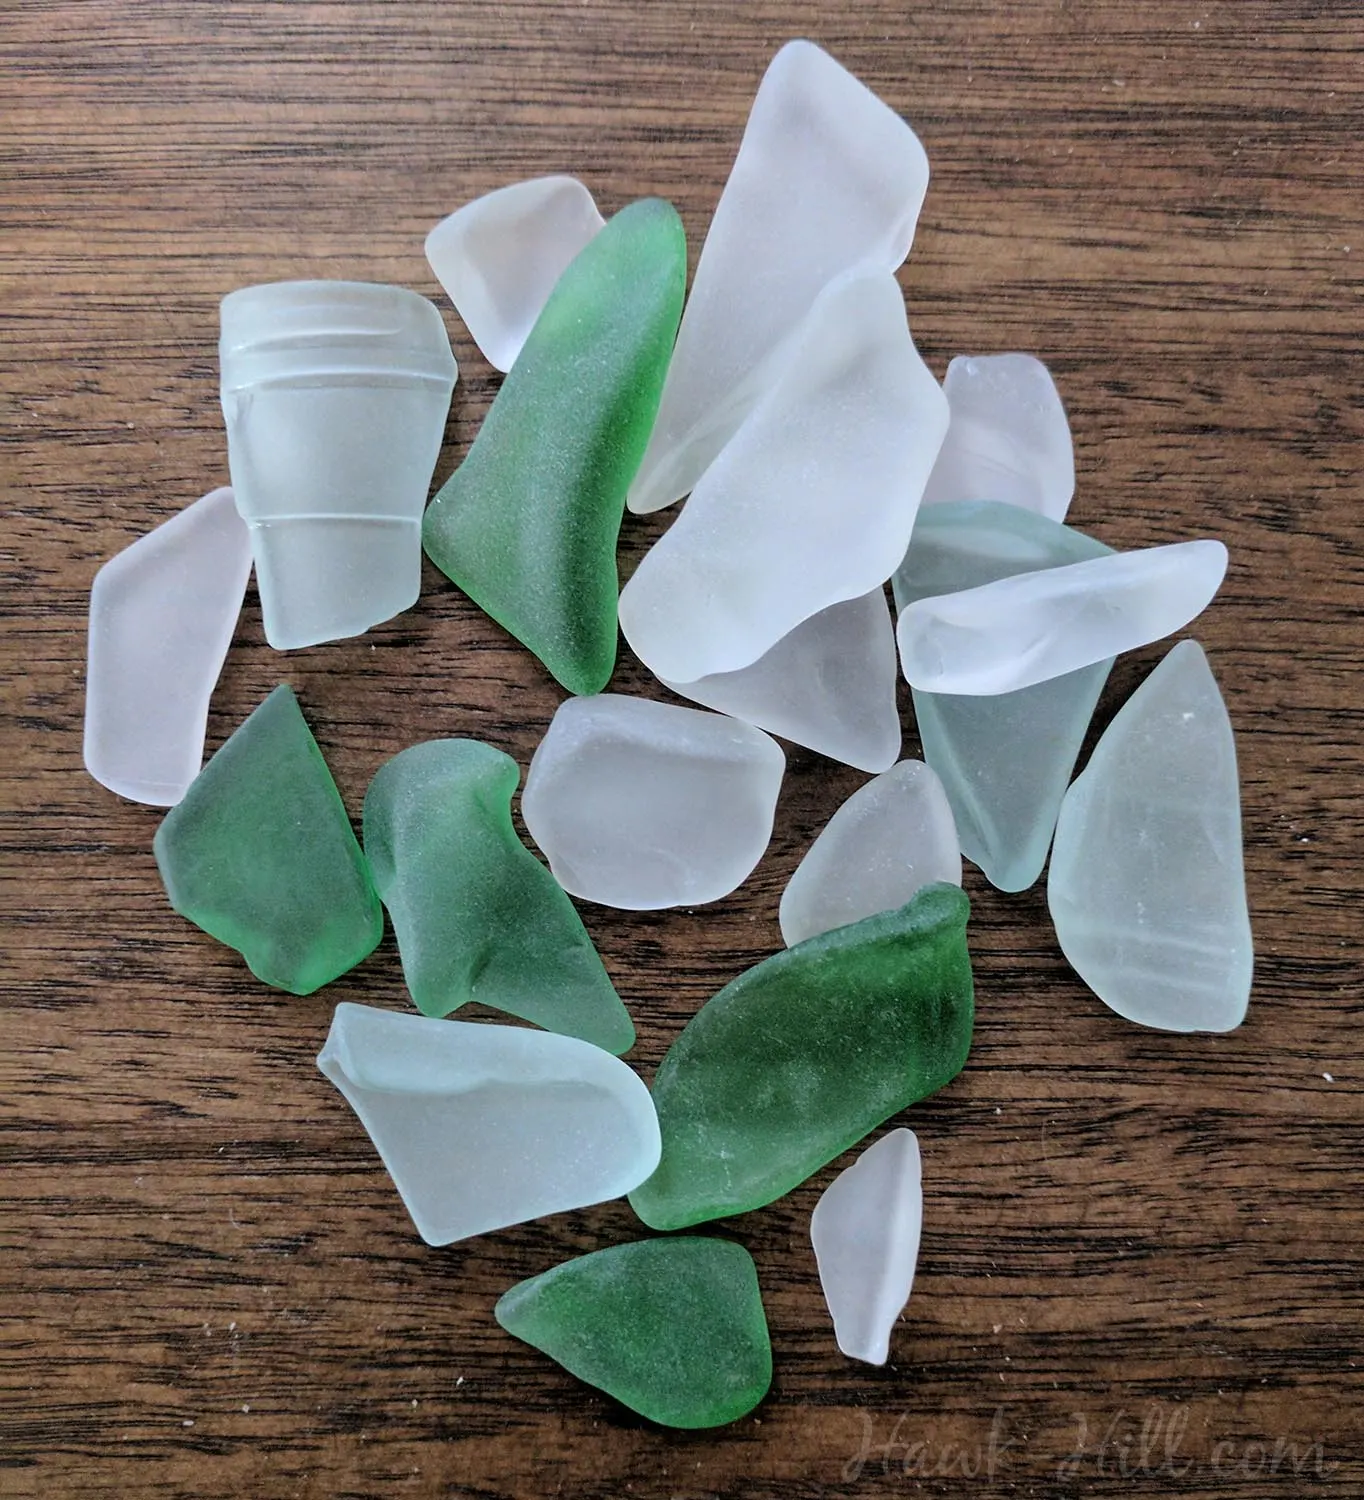 homemade sea glass made from reclaimed recycling